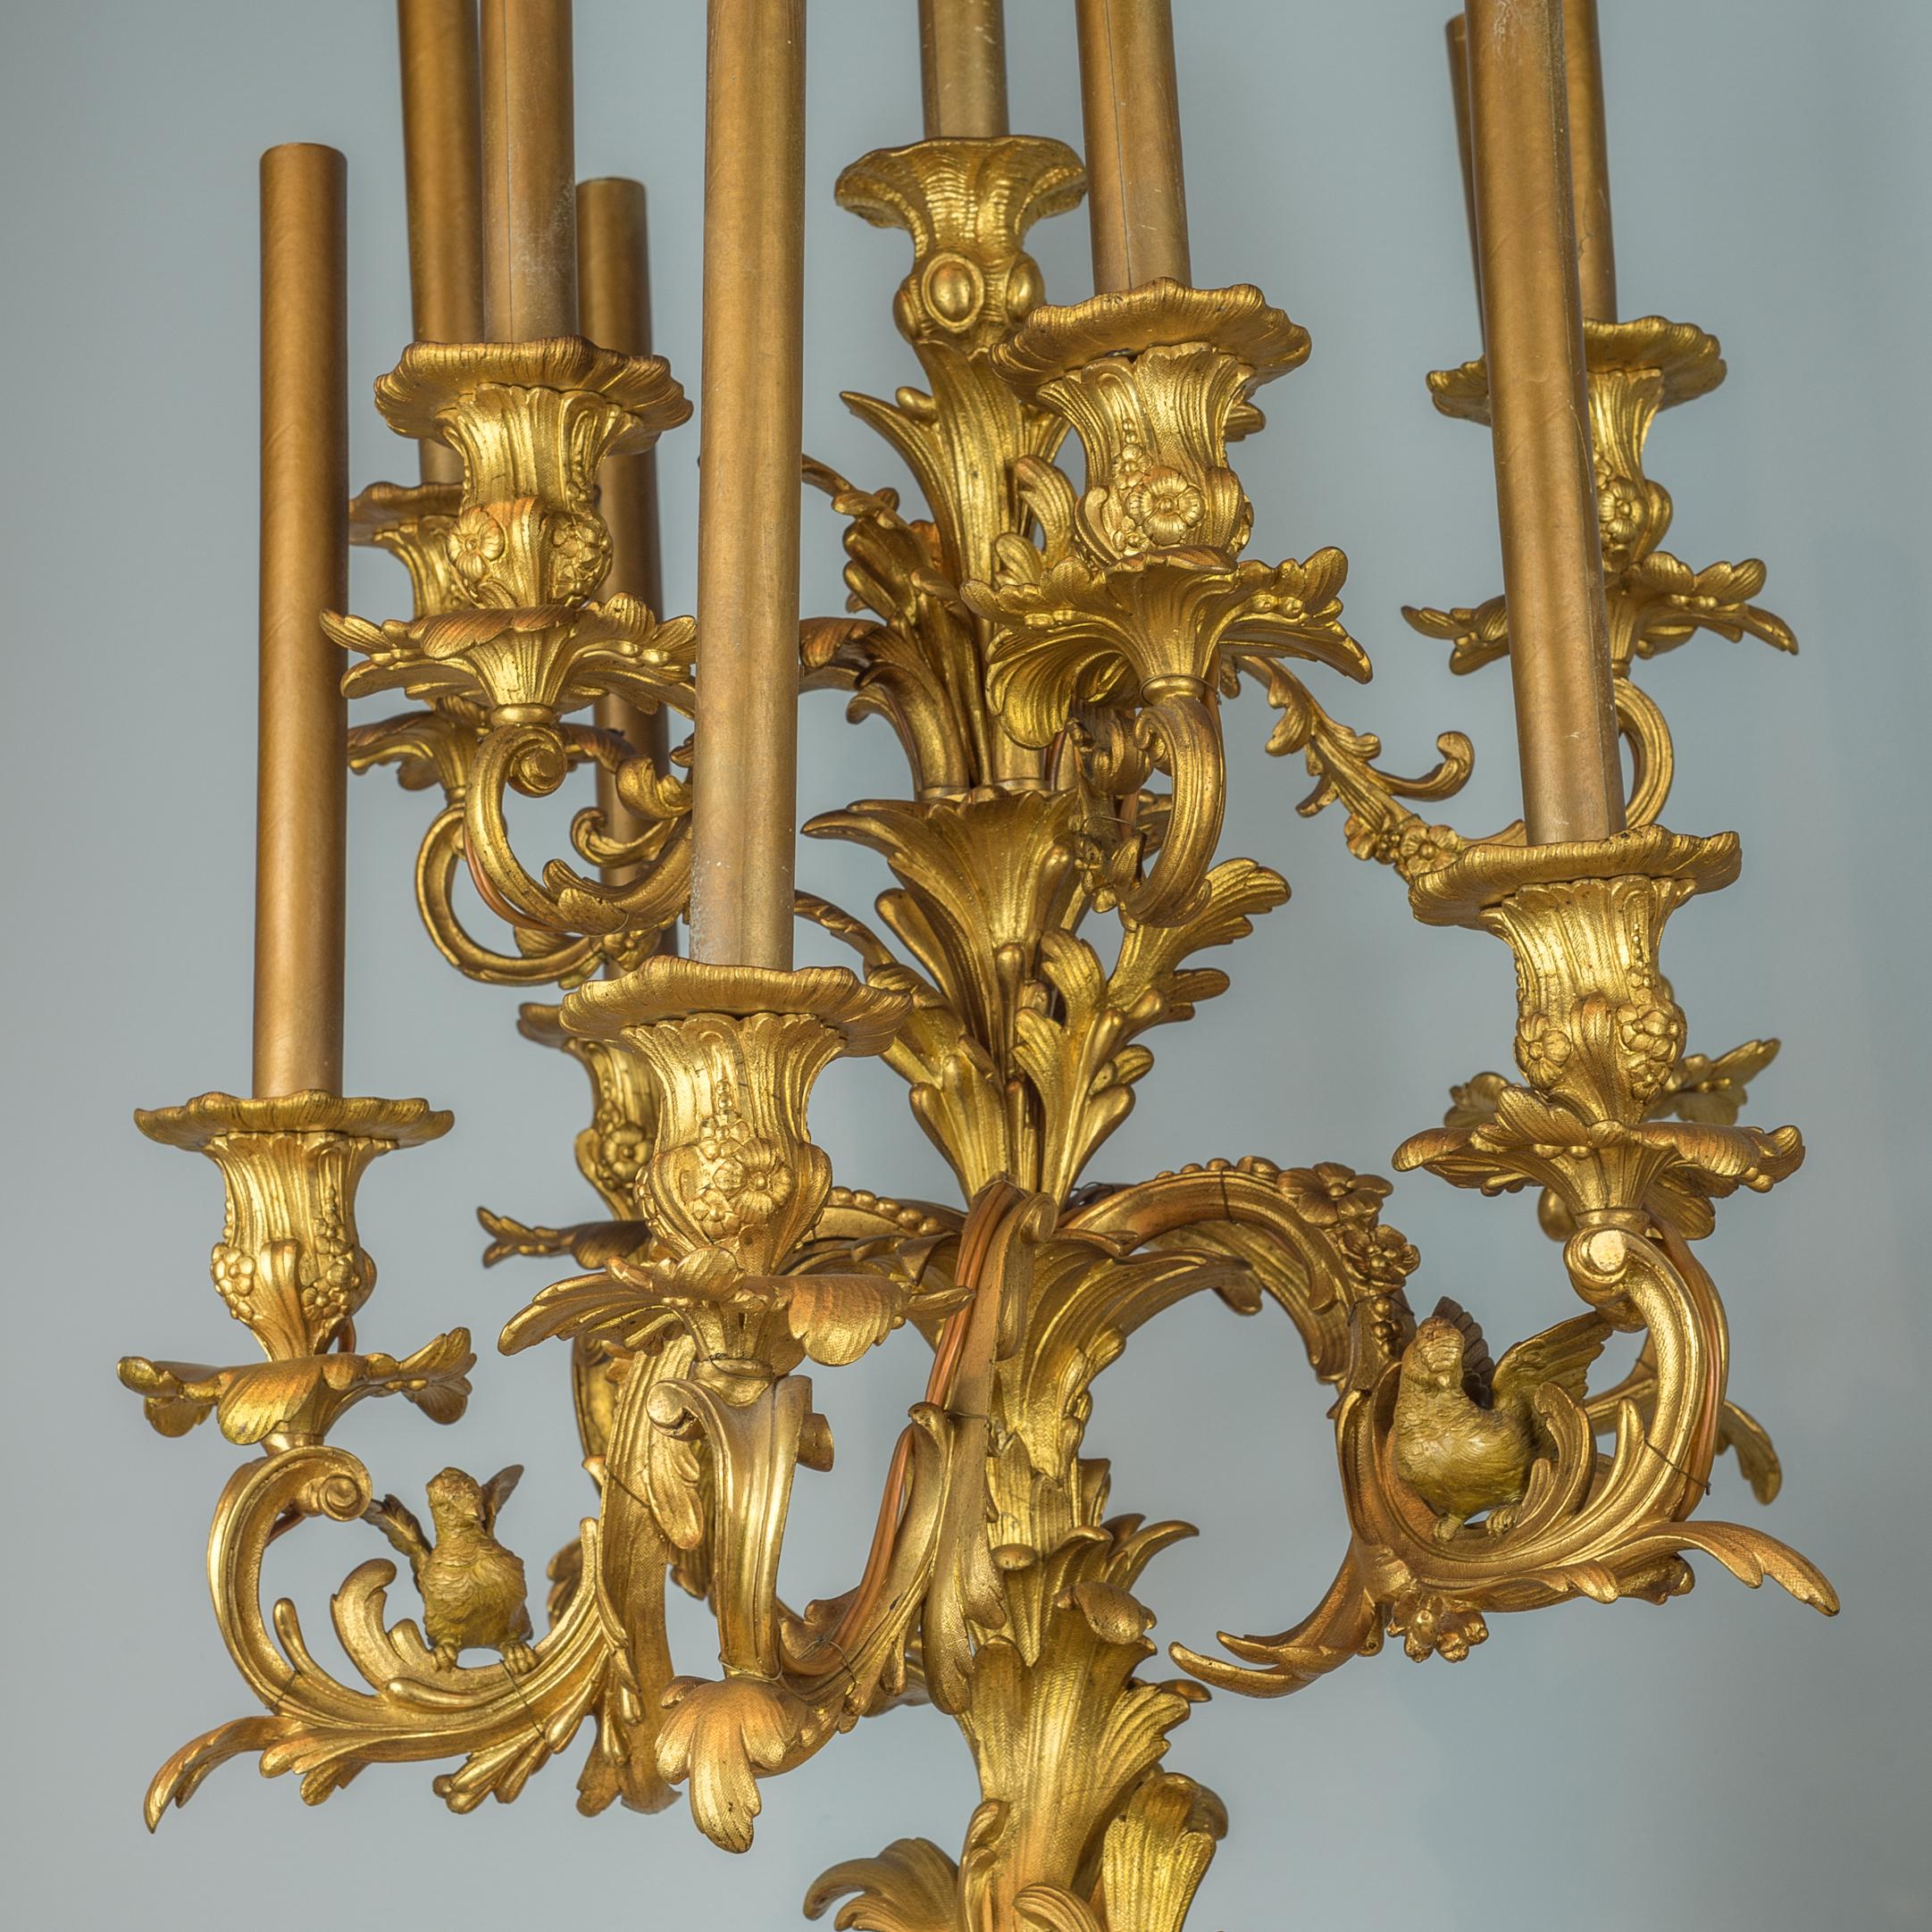 Monumental Gilt Bronze Clockset with Putti Playing with Flower Garlands For Sale 1